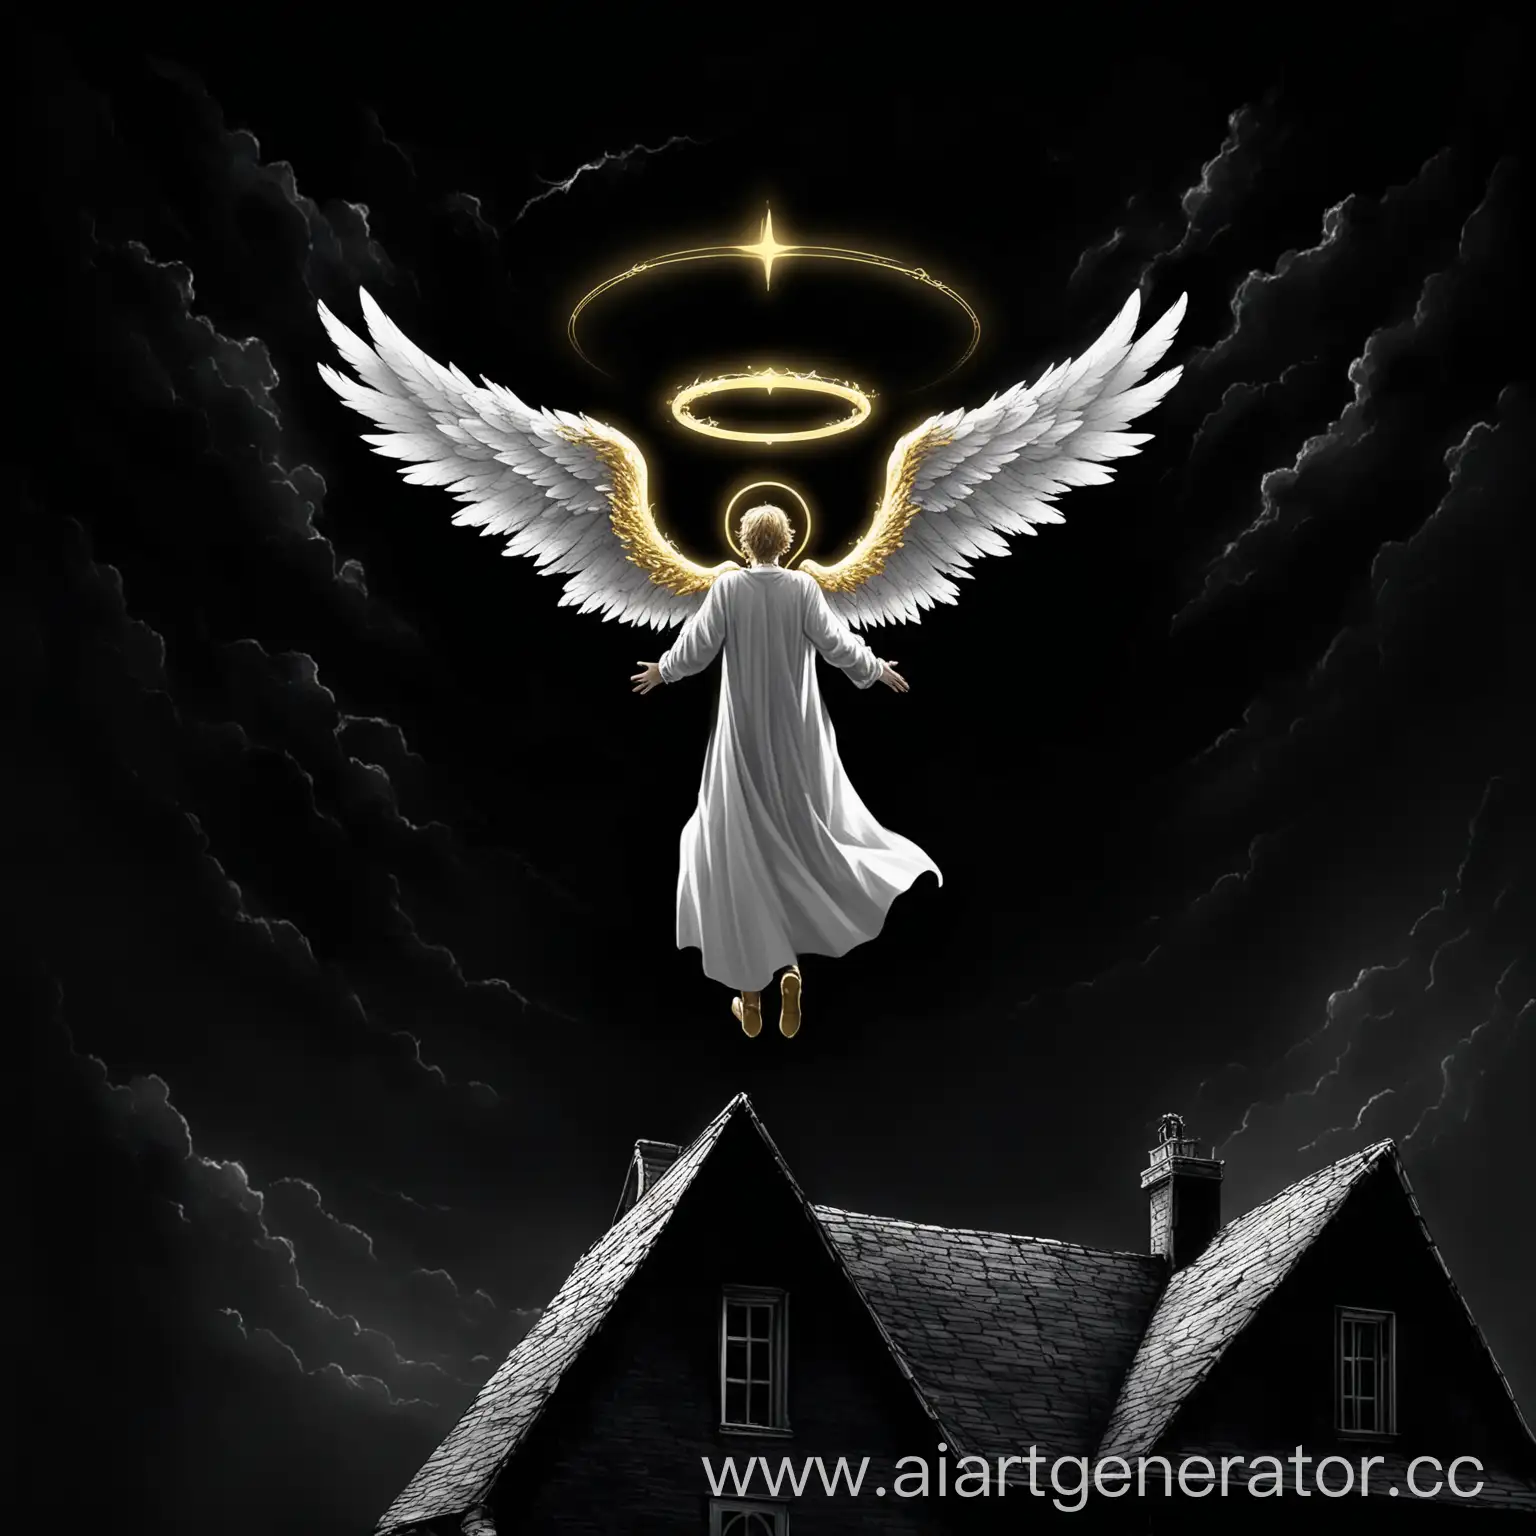 Male-Angel-with-Golden-Halo-Flying-Above-House-in-Darkness